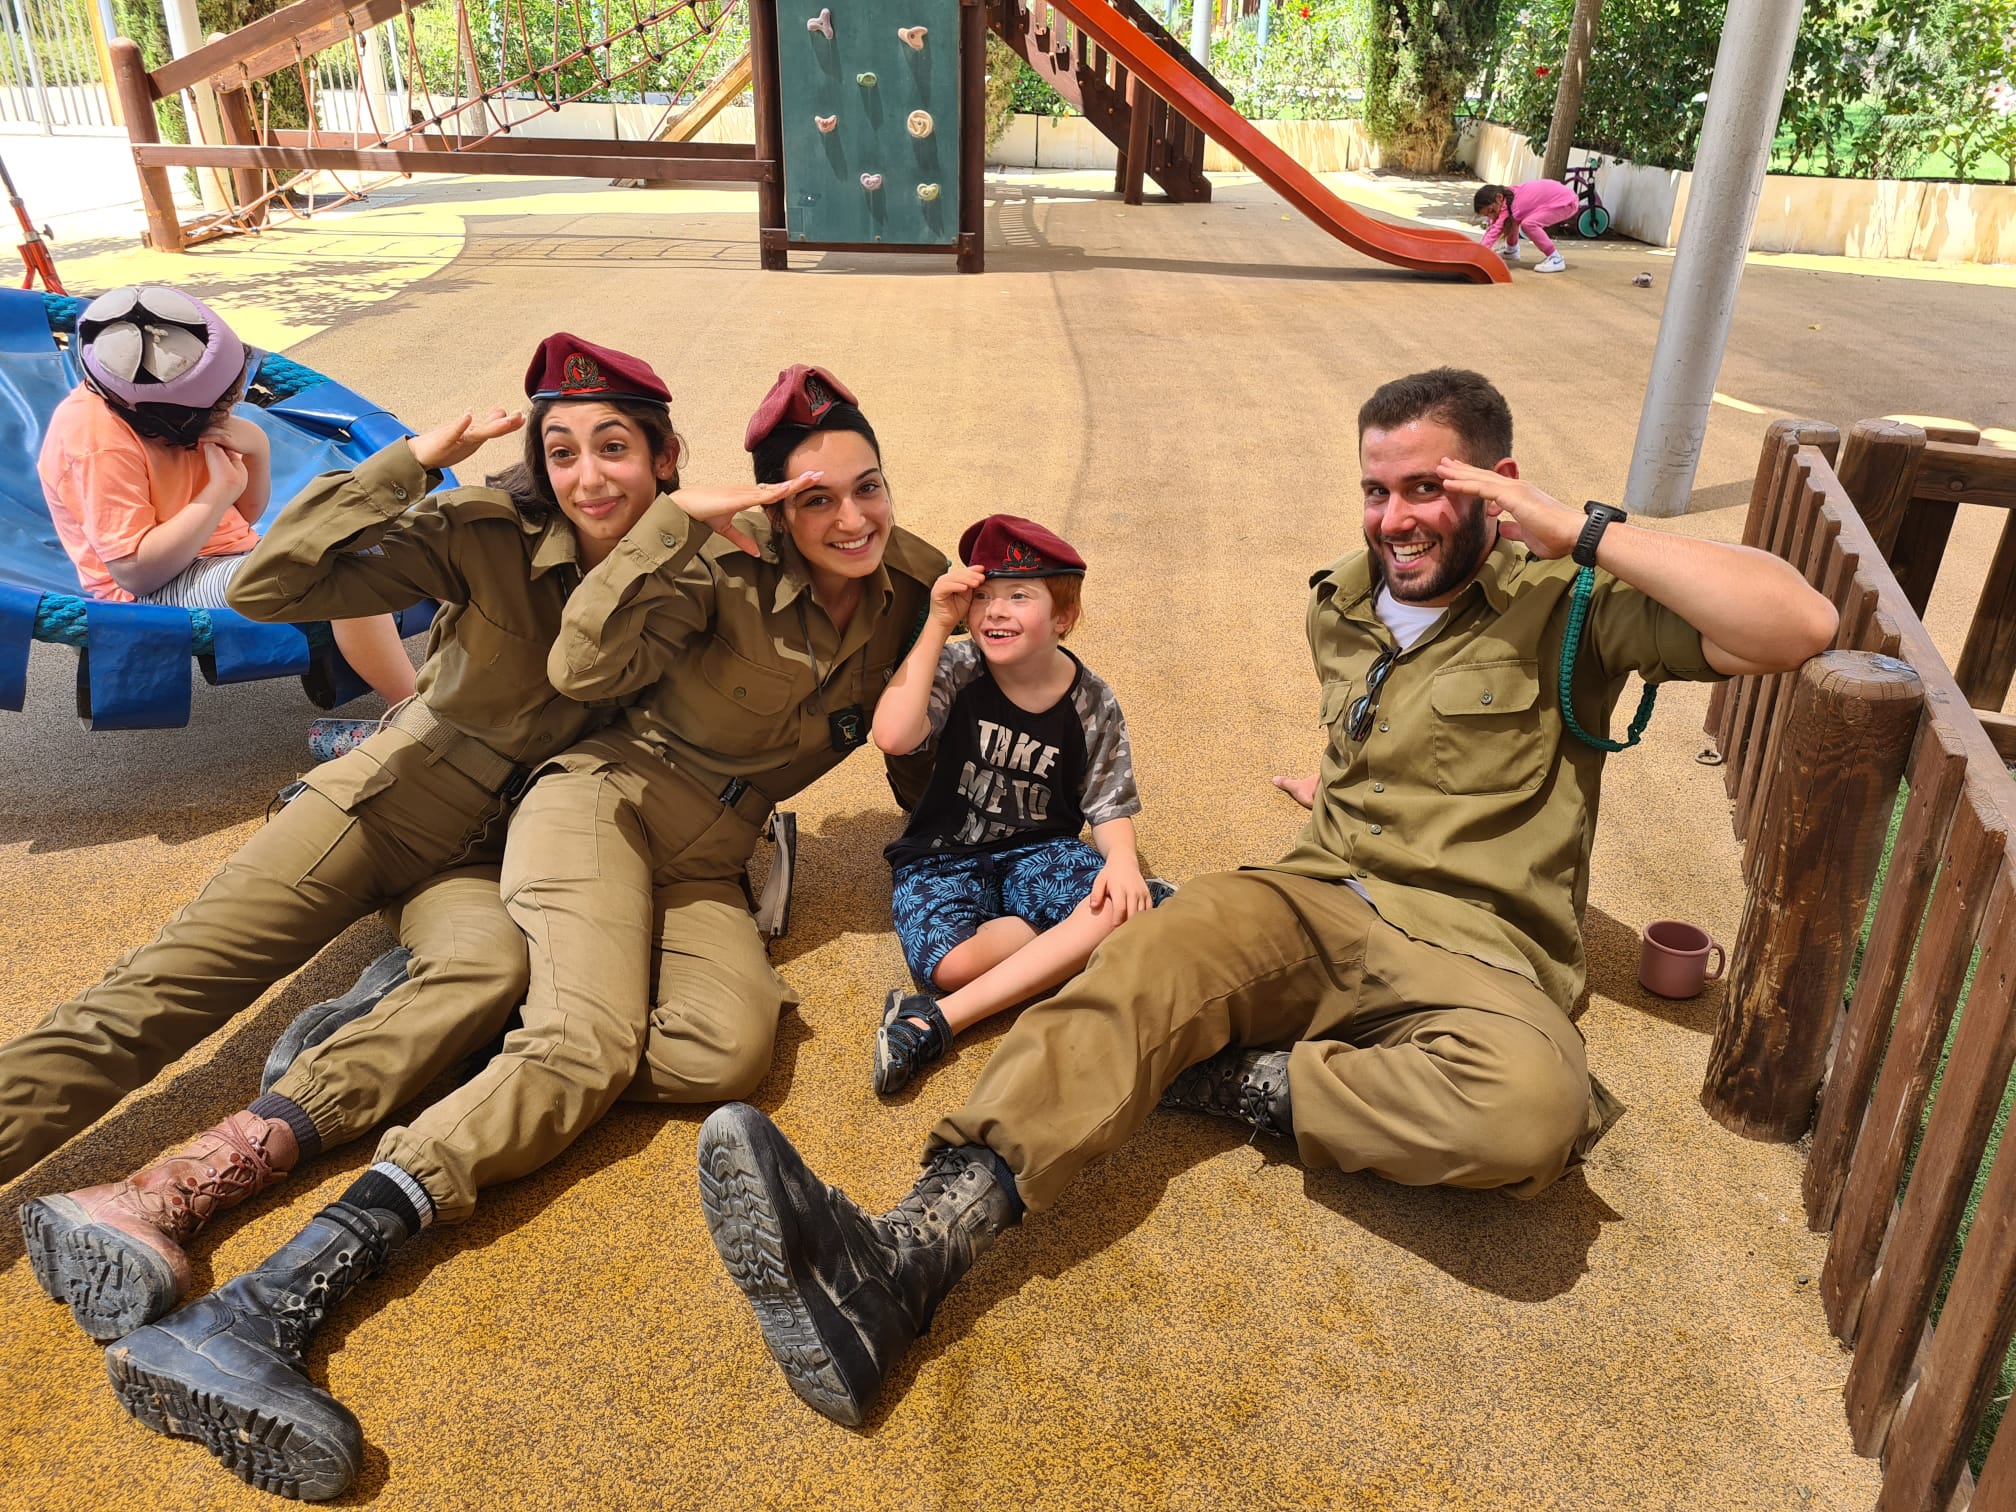 Child with disabilities wearing soldier's beret salutes with soldiers ילד עם מגבלויות חבוש כובע חייל מצדיע עם חיילים